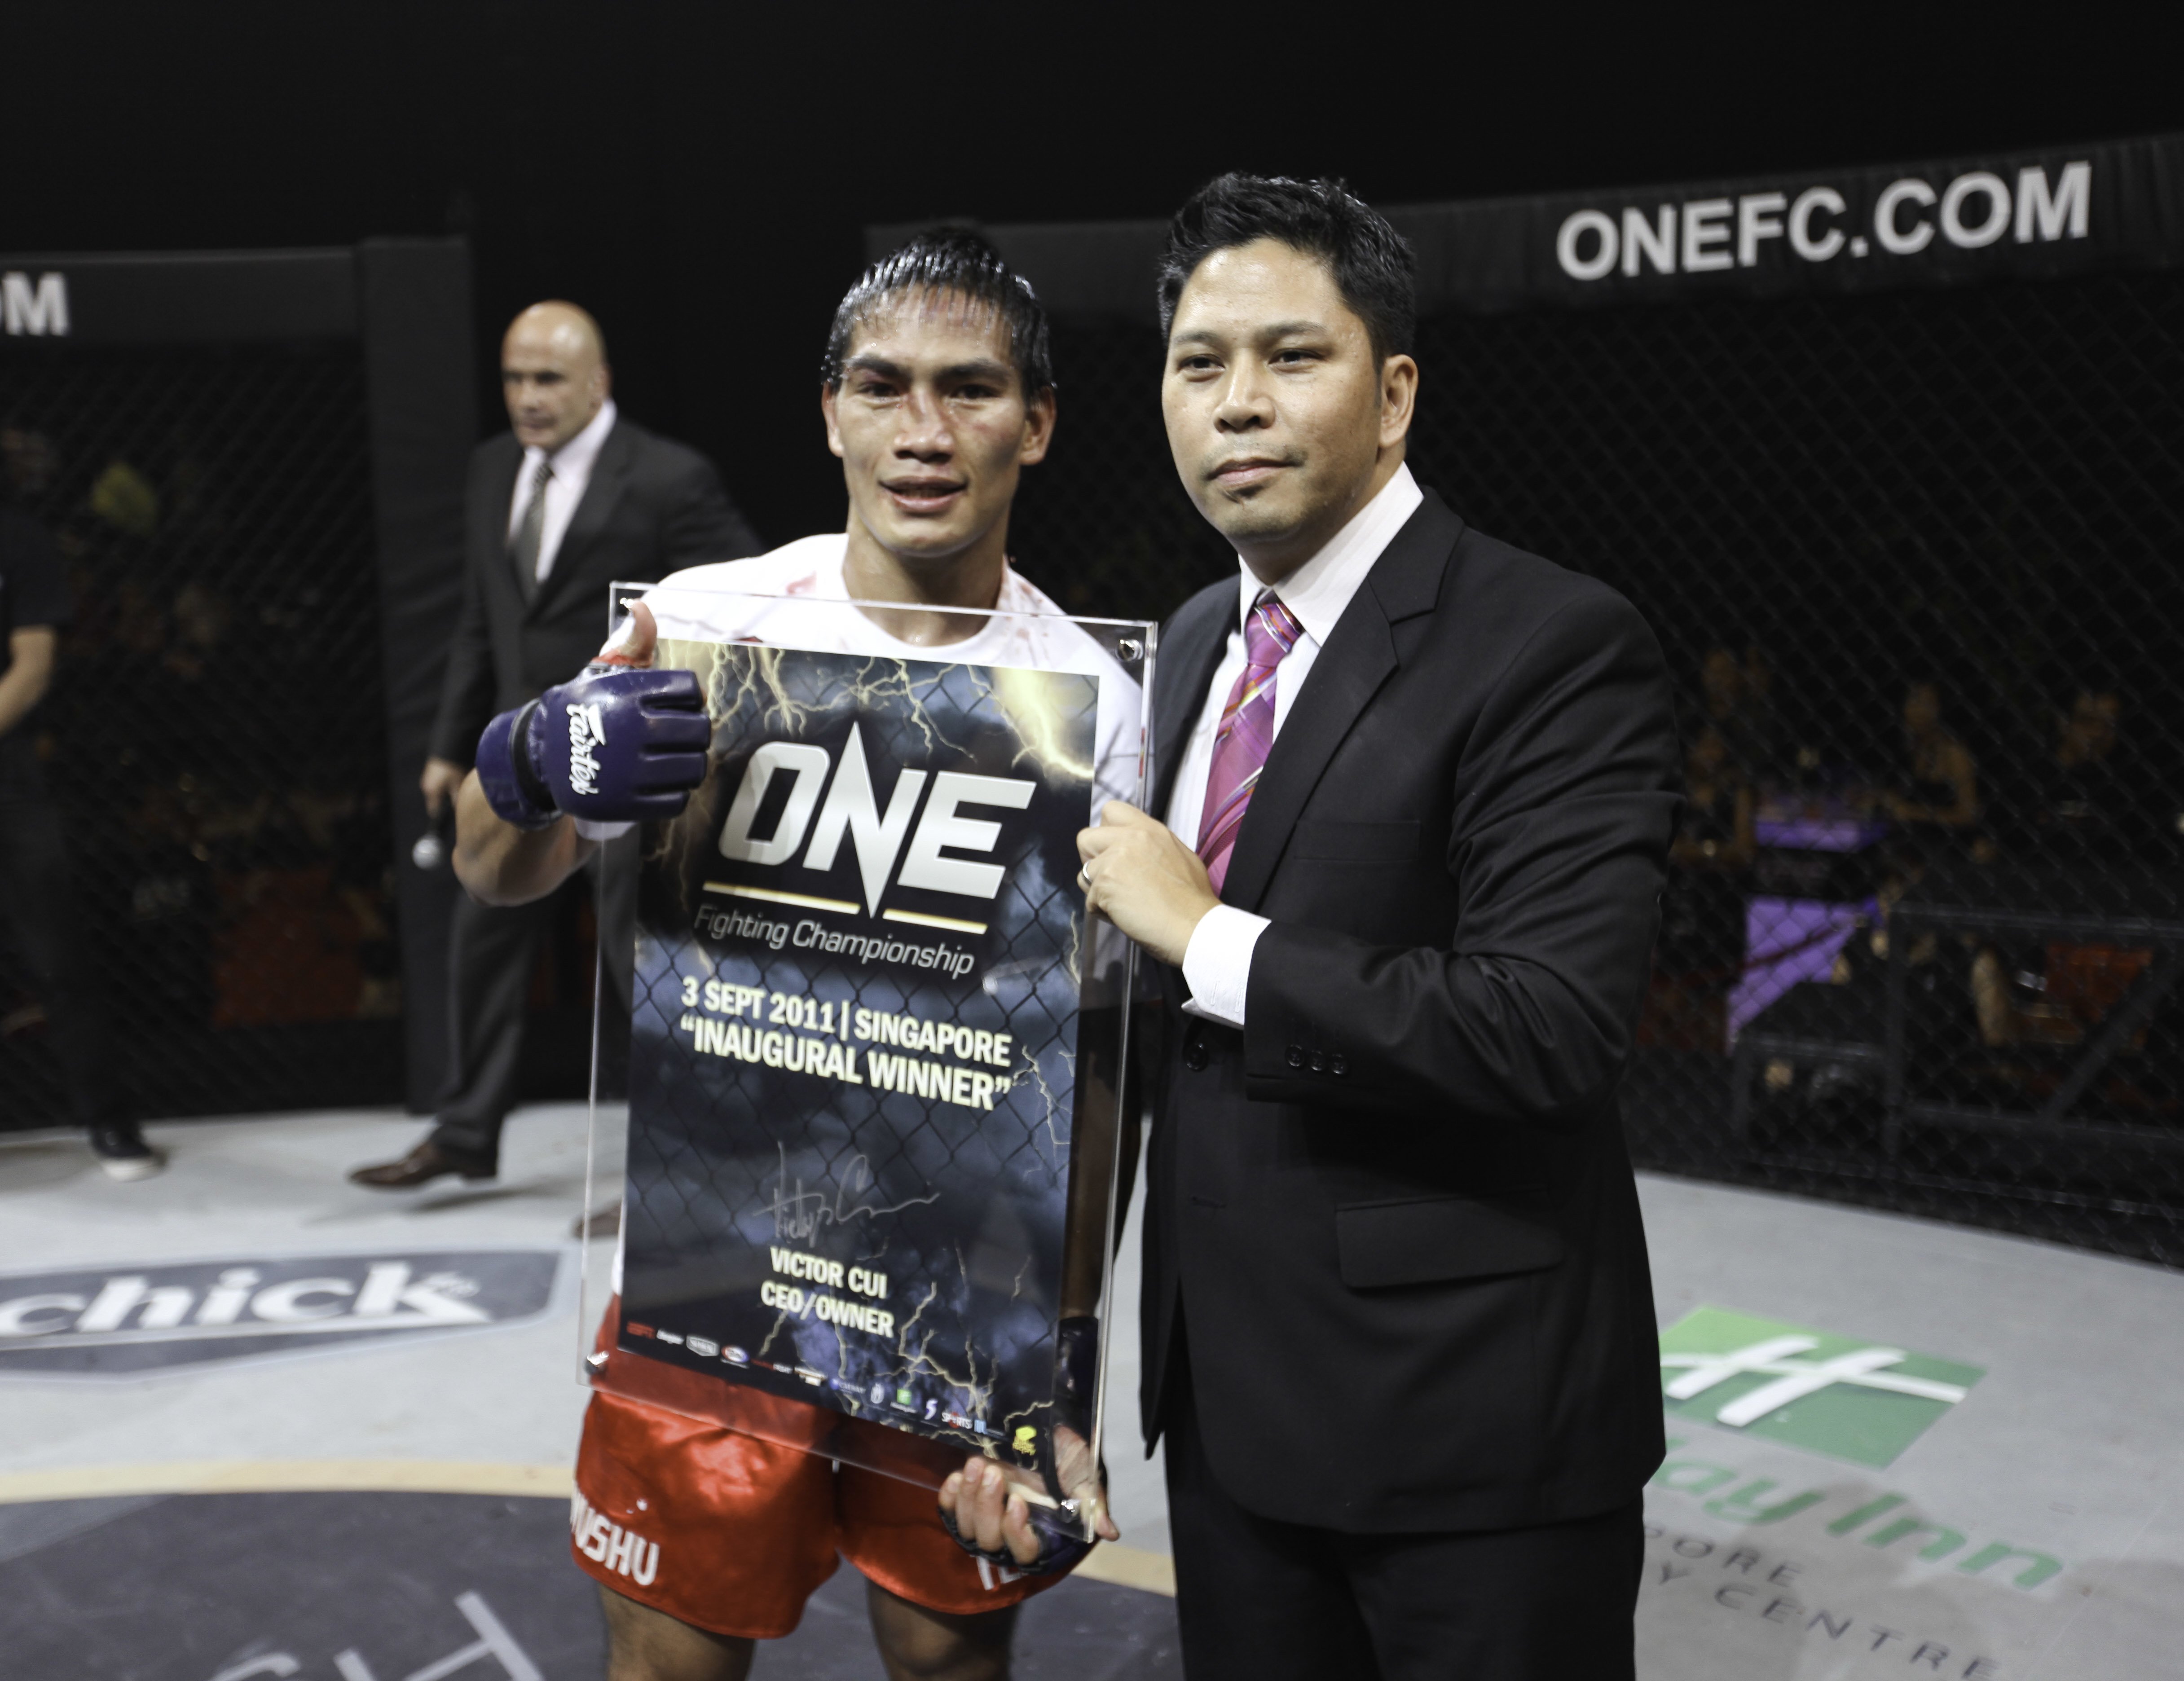 Eduard Folayang and Victor Cui